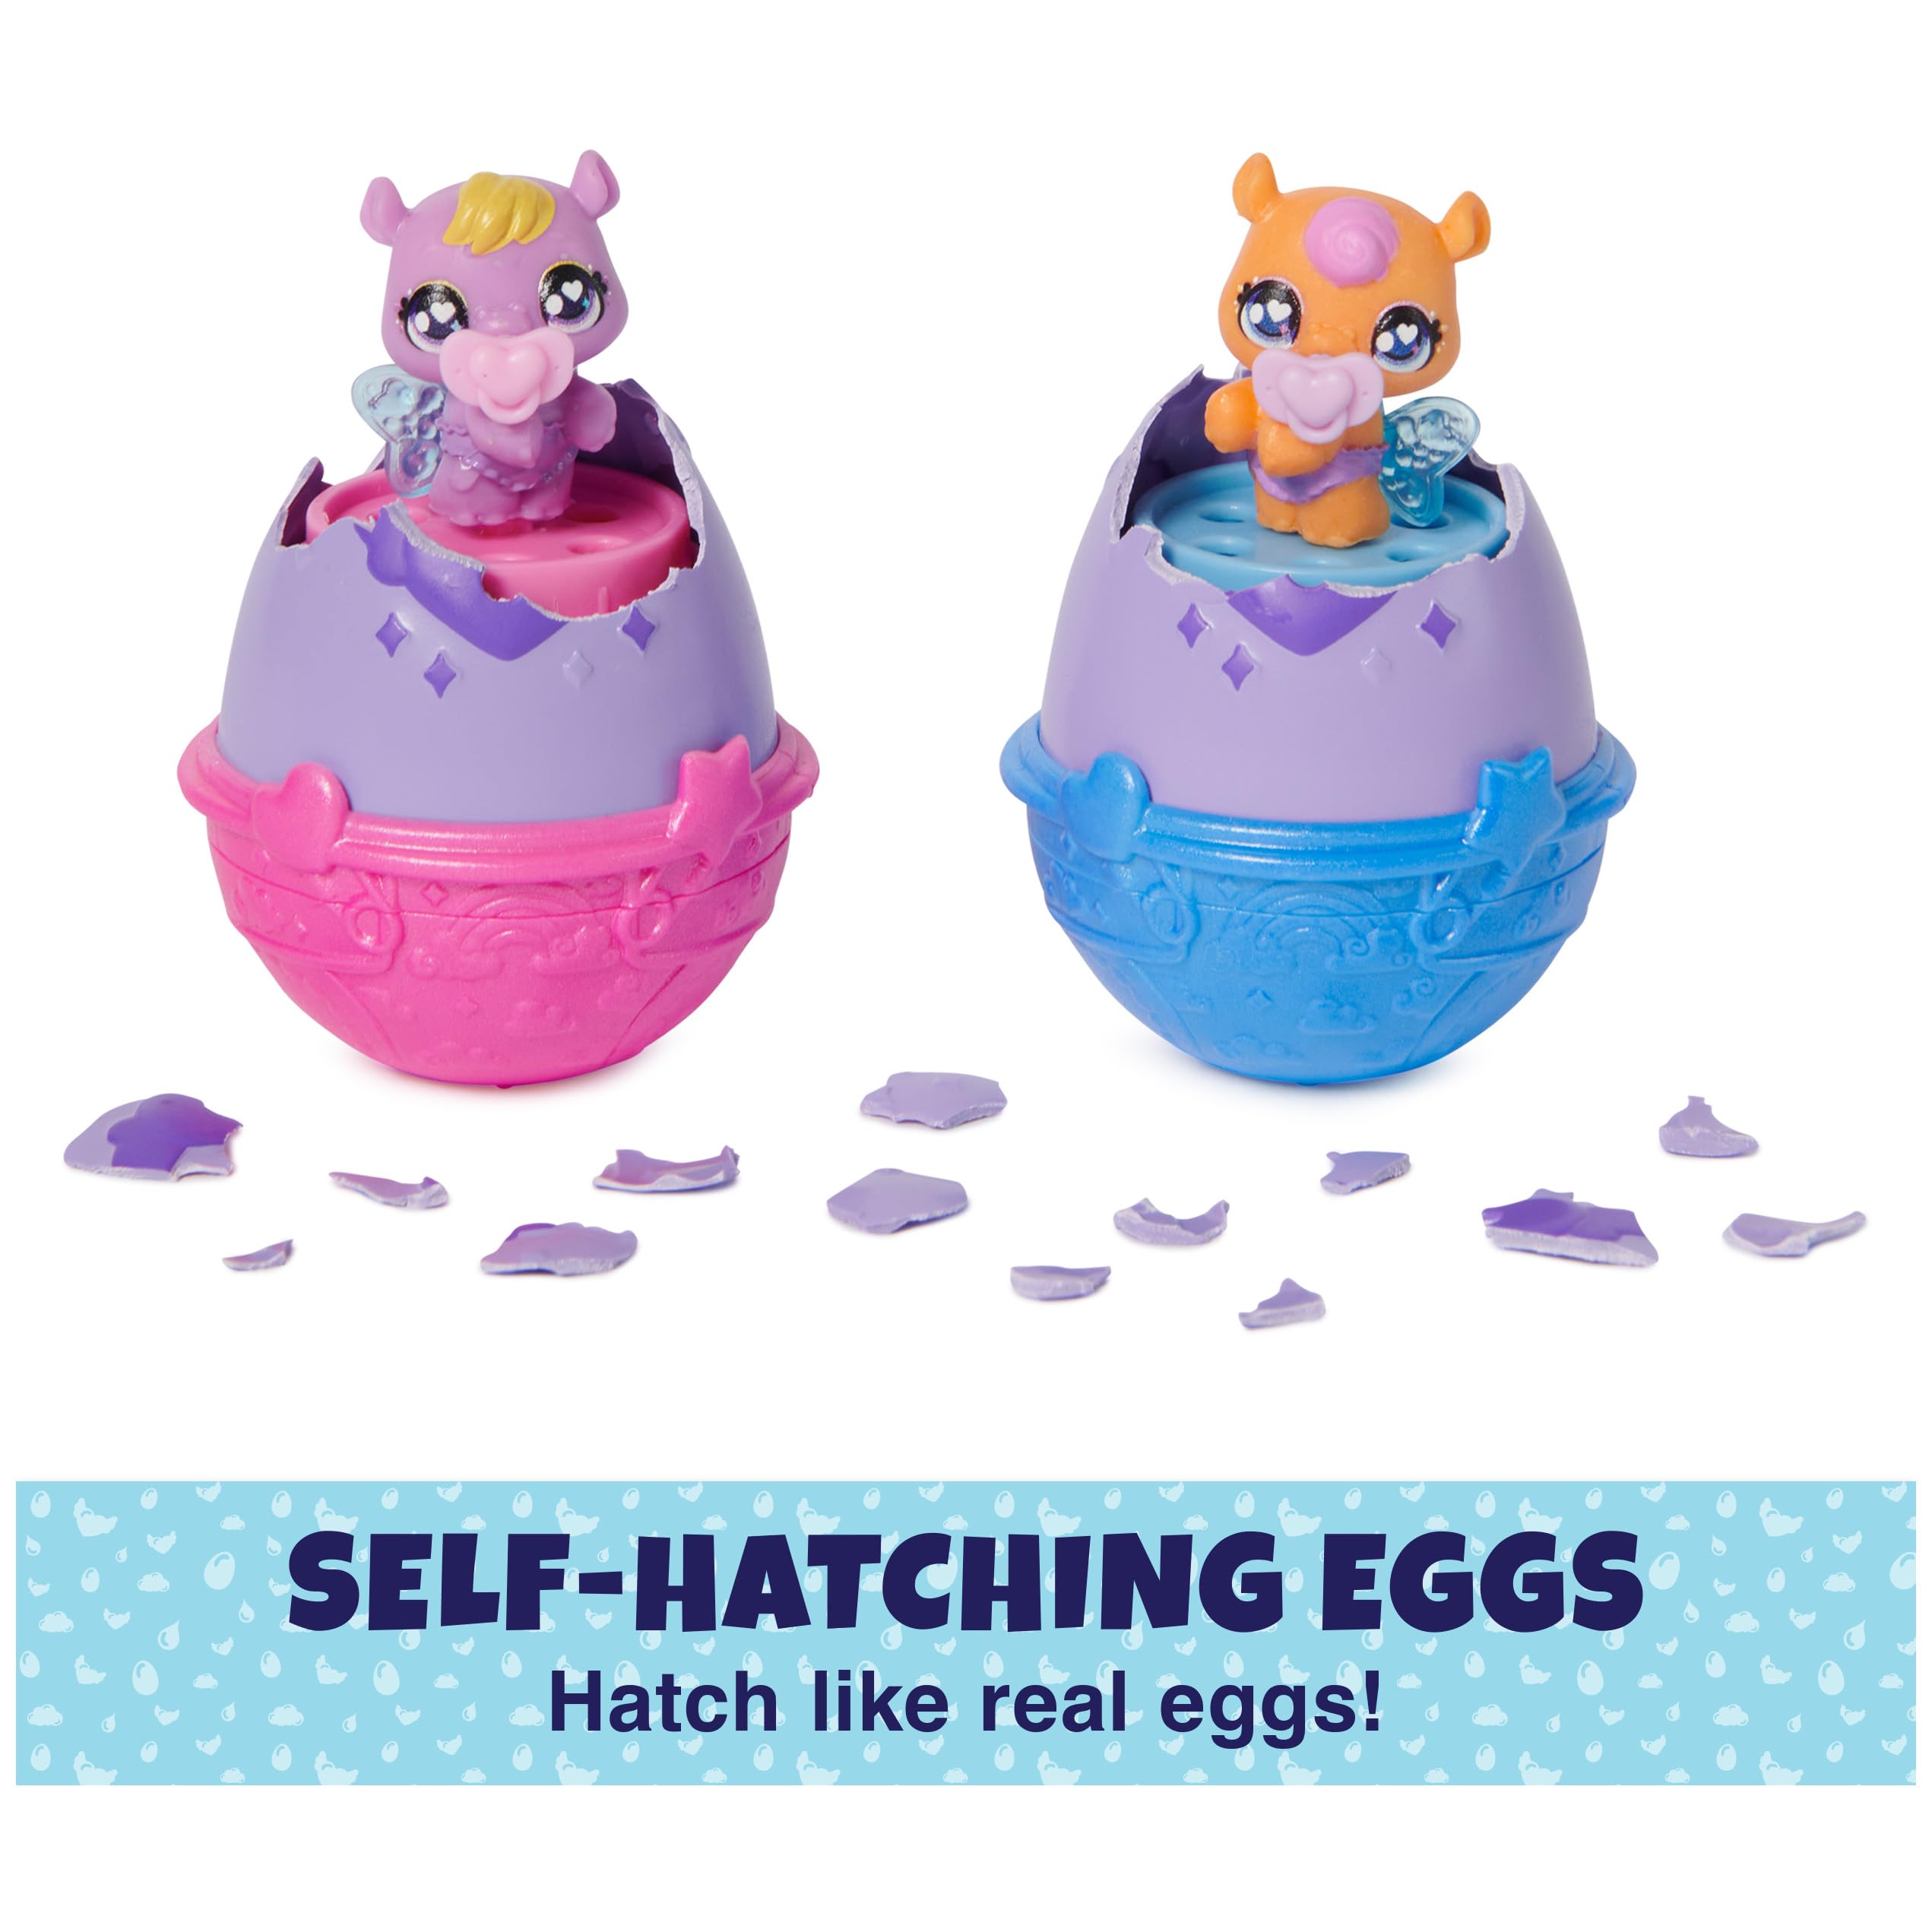 Hatchimals Alive, Make a Splash Playset with 15 Accessories, Bathtub, 2 Color-Change Mini Figures in Self-Hatching Eggs, Kids Toys for Girls and Boys